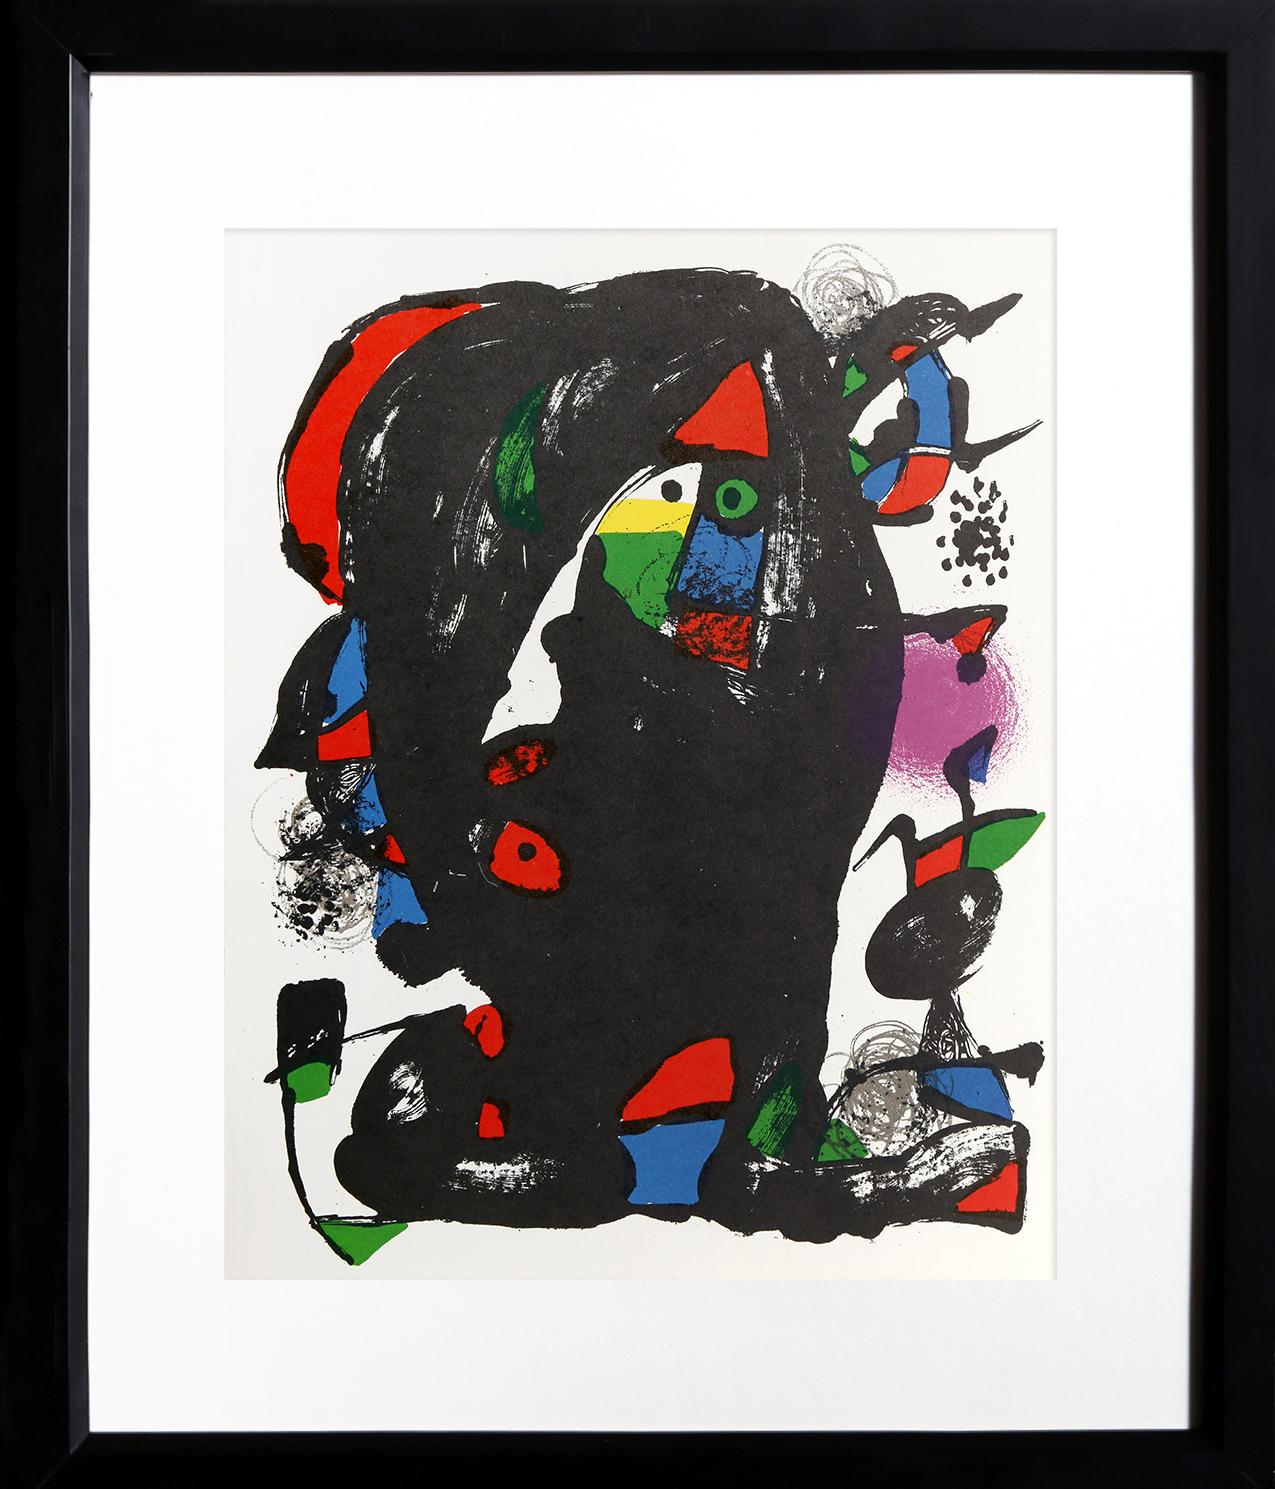 Joan Miro is known for his abstract, expressive, and child-like Modern style. Original lithograph published in Miro Lithographe V Catalogue Raisonne. Nicely framed.

Lithographs IV (1259)
Joan Miro, Spanish (1893–1983)
Date: 1981
Lithograph
Size: 12